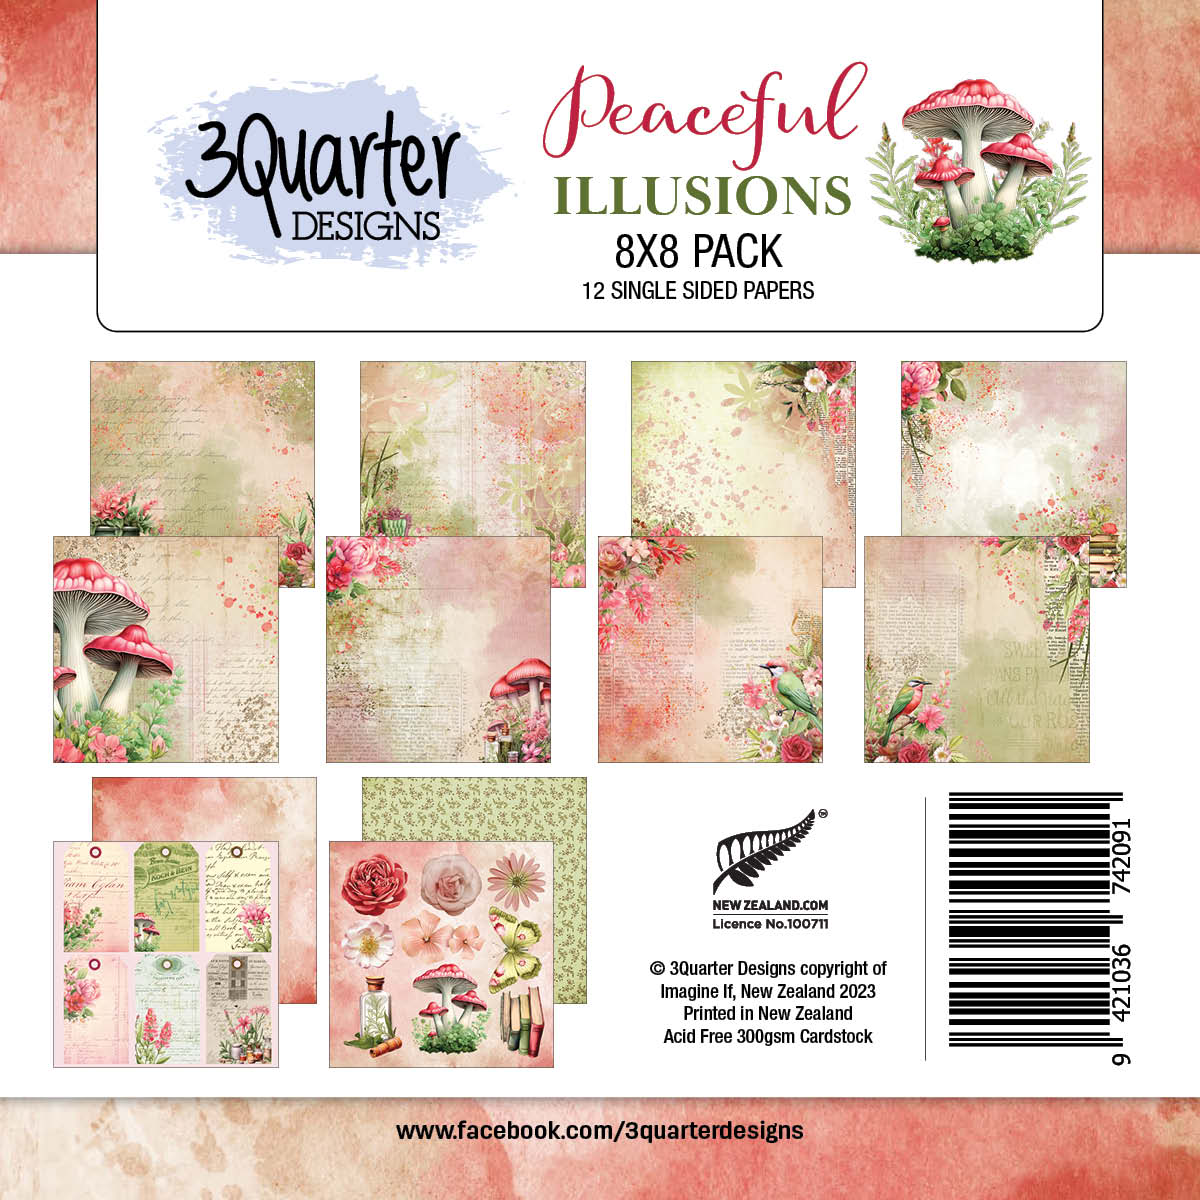 Peaceful Illusions 8x8 Pack